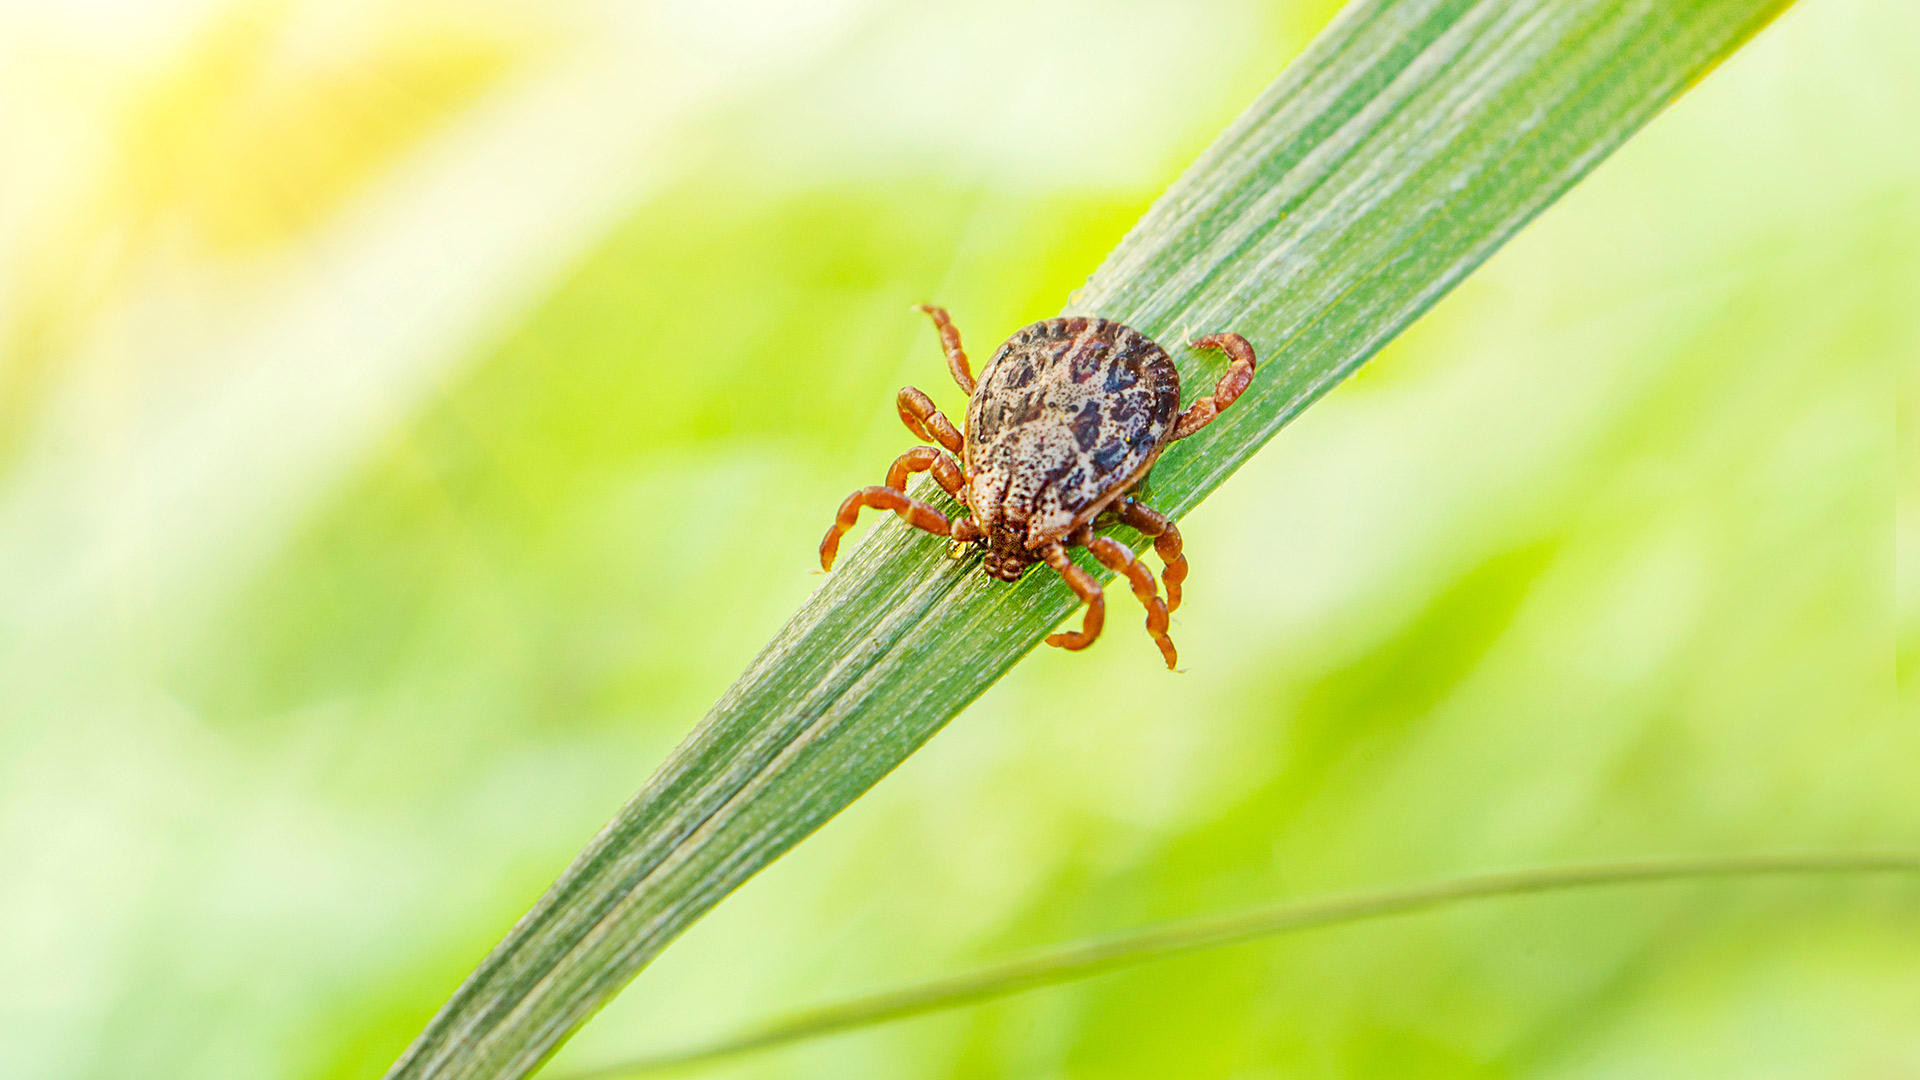 A tick crawling down a piece of grass blade in Doylestown, PA.